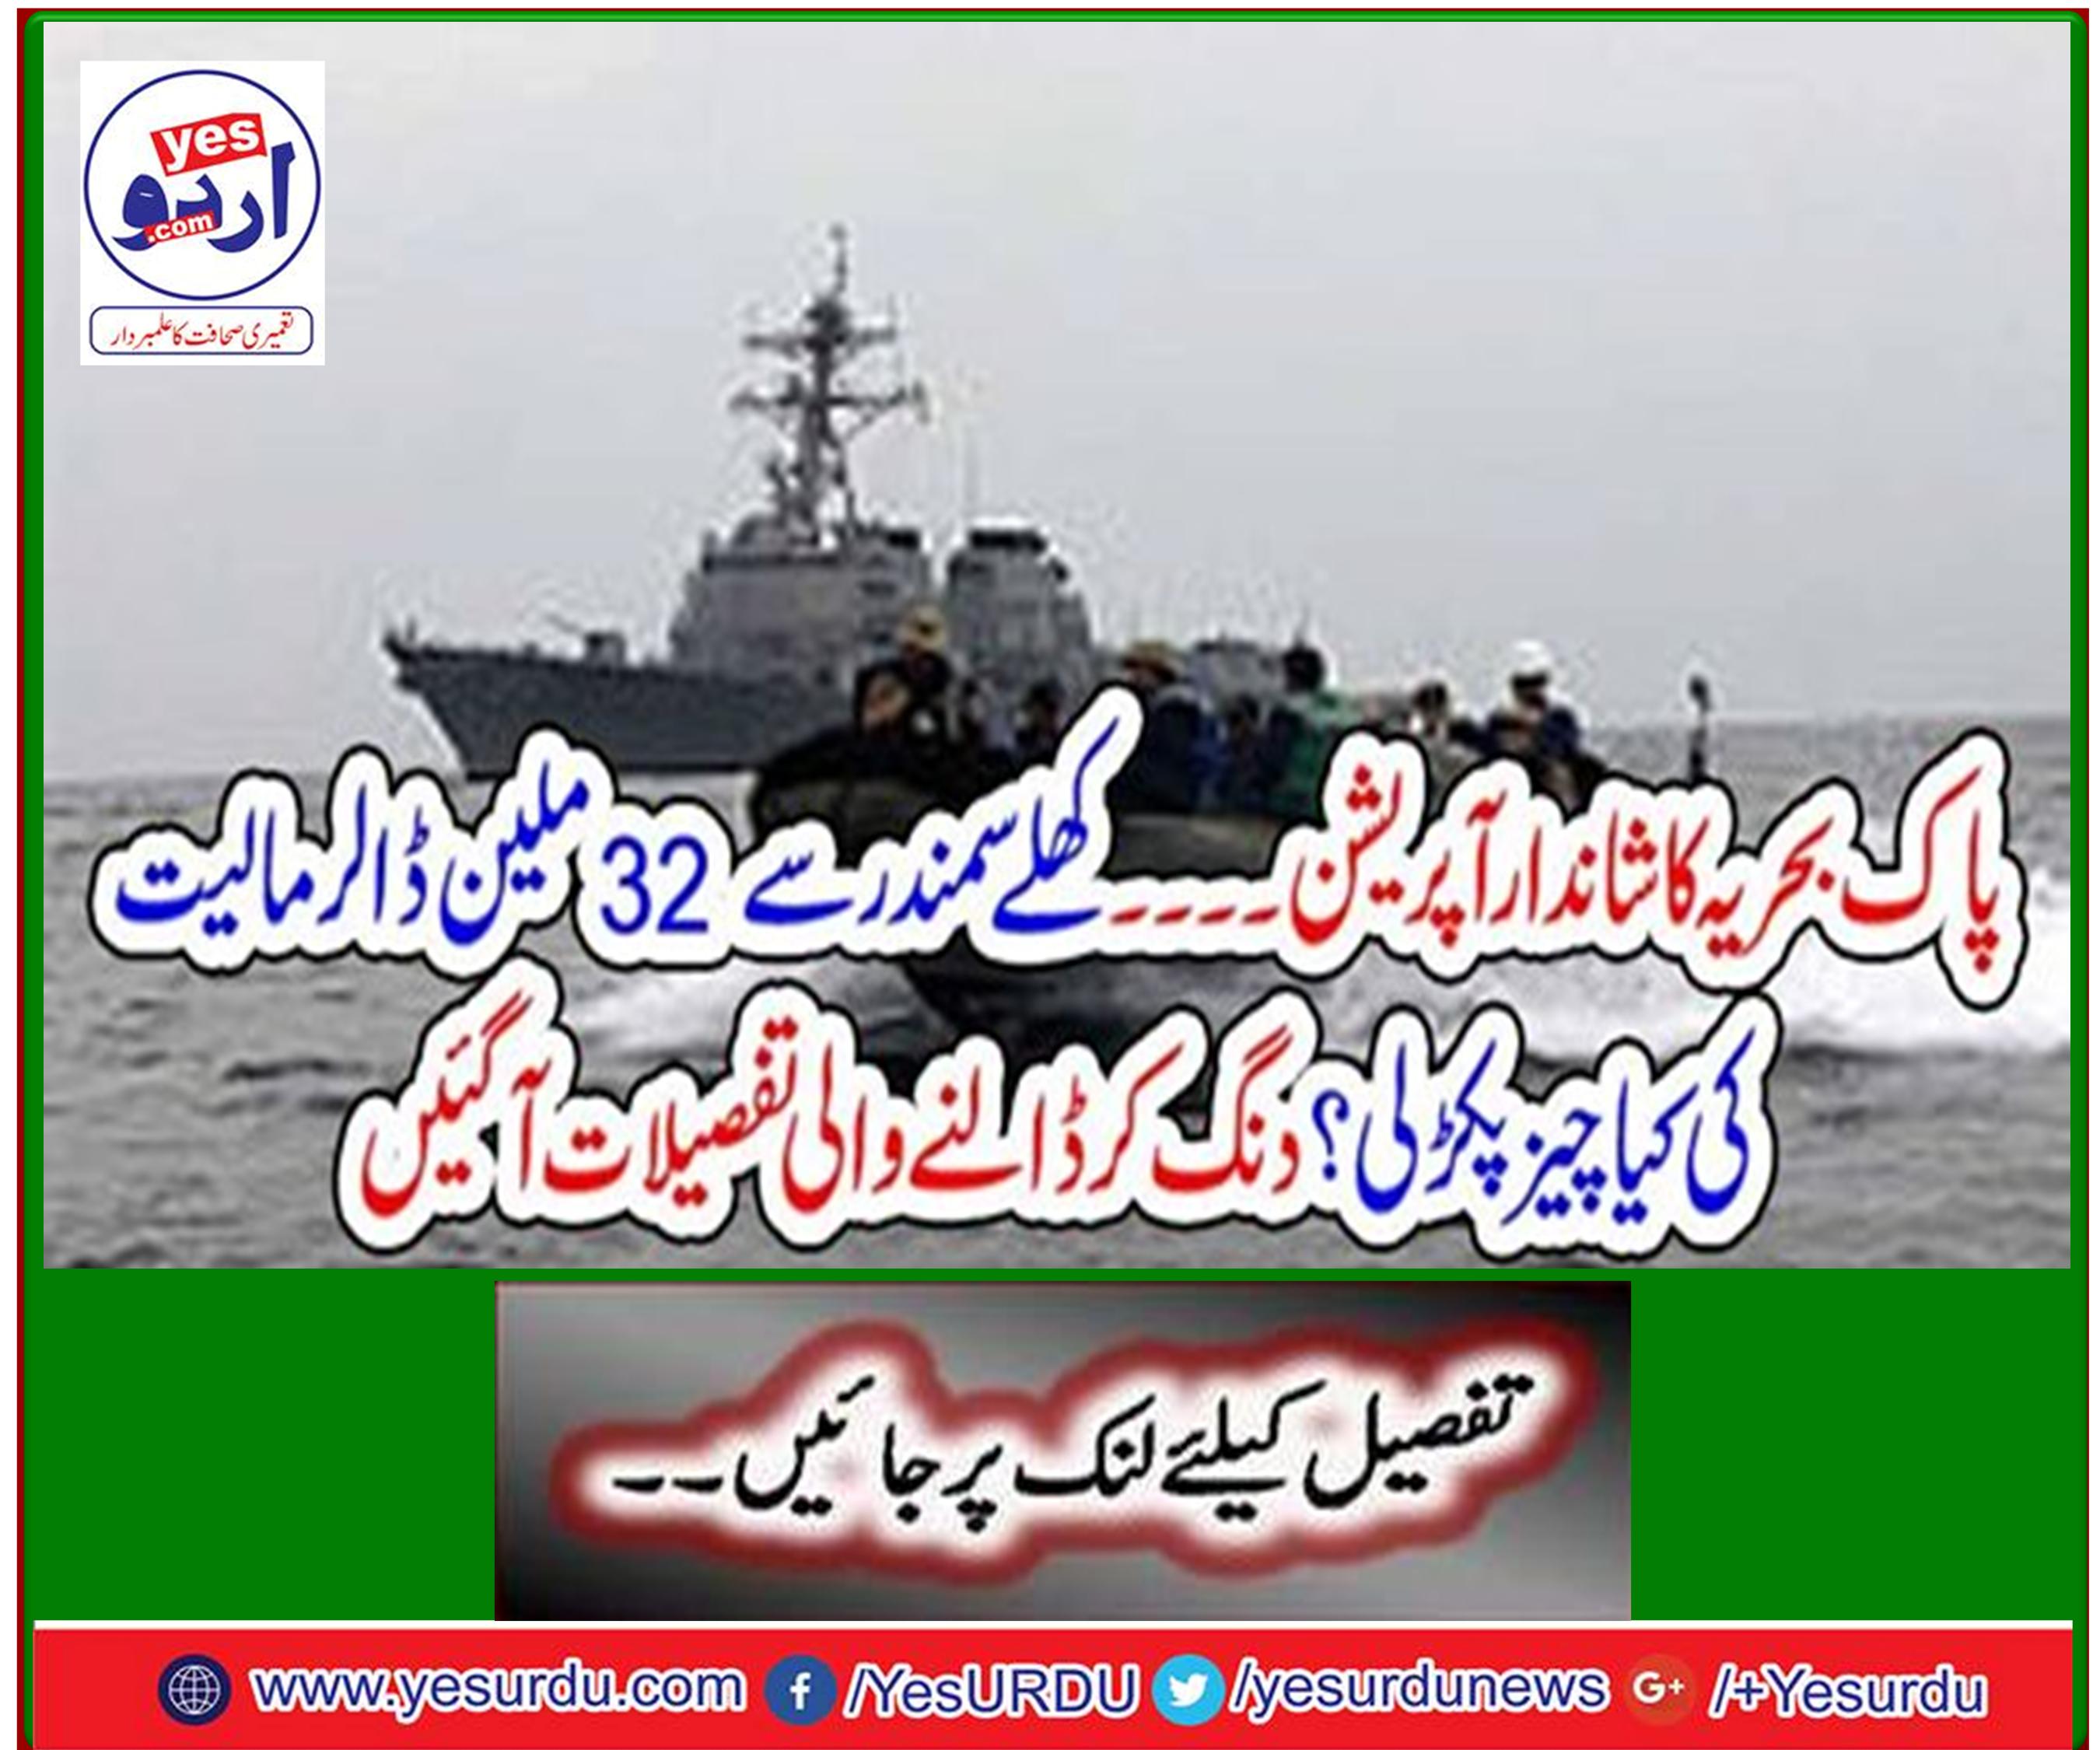 Great operation of the Pak Navy ... $ 32 million worth of goods seized from the open sea? Stunned details have come up